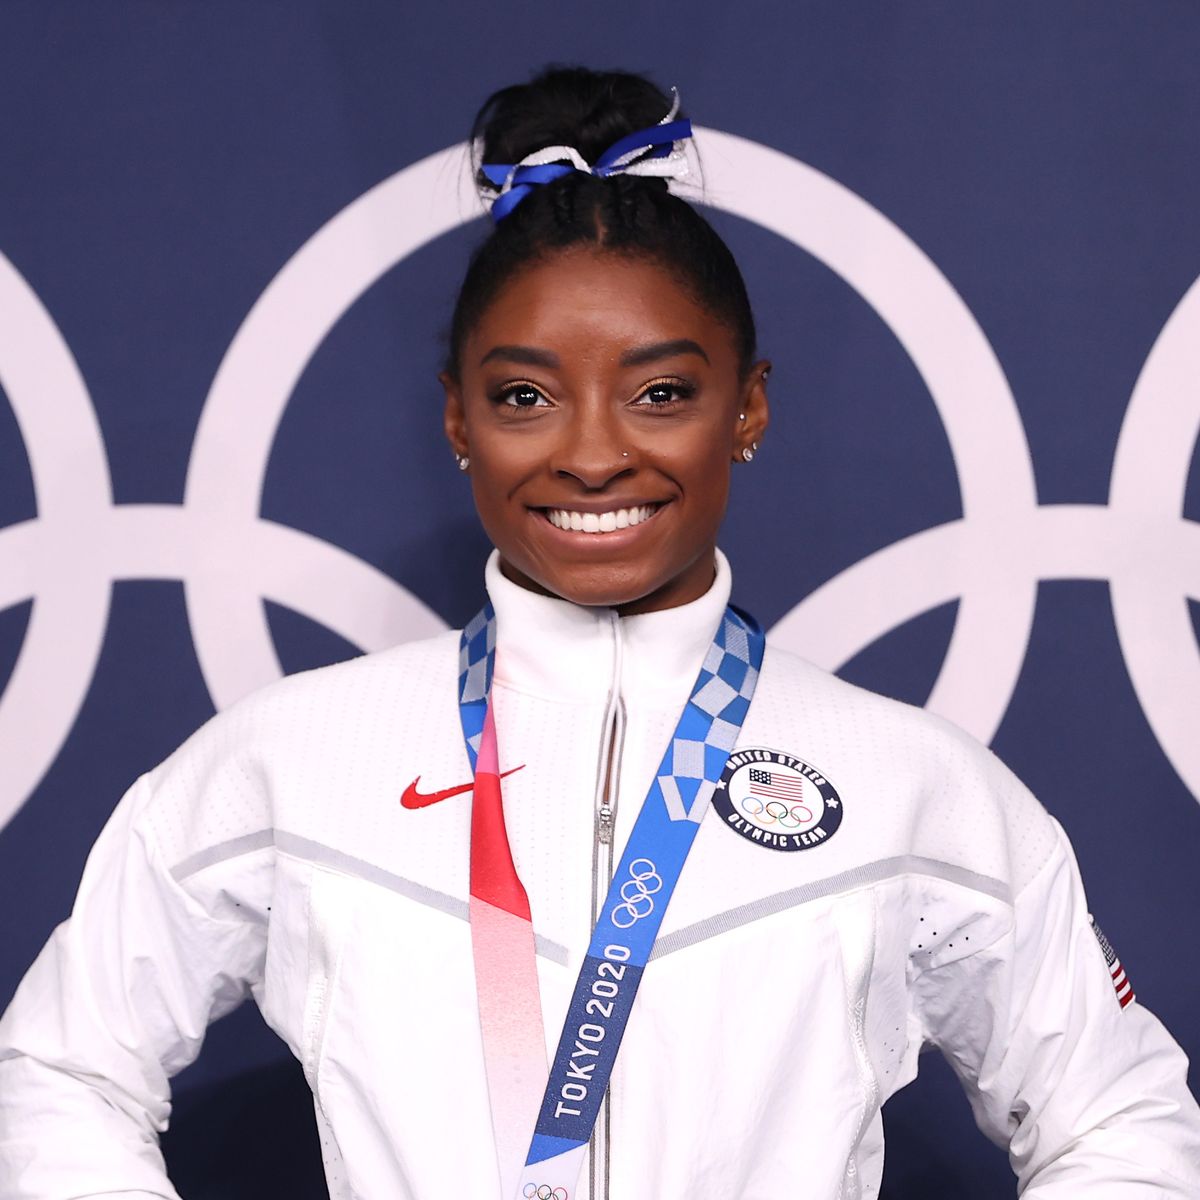 Gymnastics - Artistic - Olympics: Day 11TOKYO, JAPAN - AUGUST 03: Simone Biles of Team United States poses with the bronze medal following the Women's Balance Beam Final on day eleven of the Tokyo 2020 Olympic Games at Ariake Gymnastics Centre on August 03, 2021 in Tokyo, Japan. (Photo by Laurence Griffiths/Getty Images)